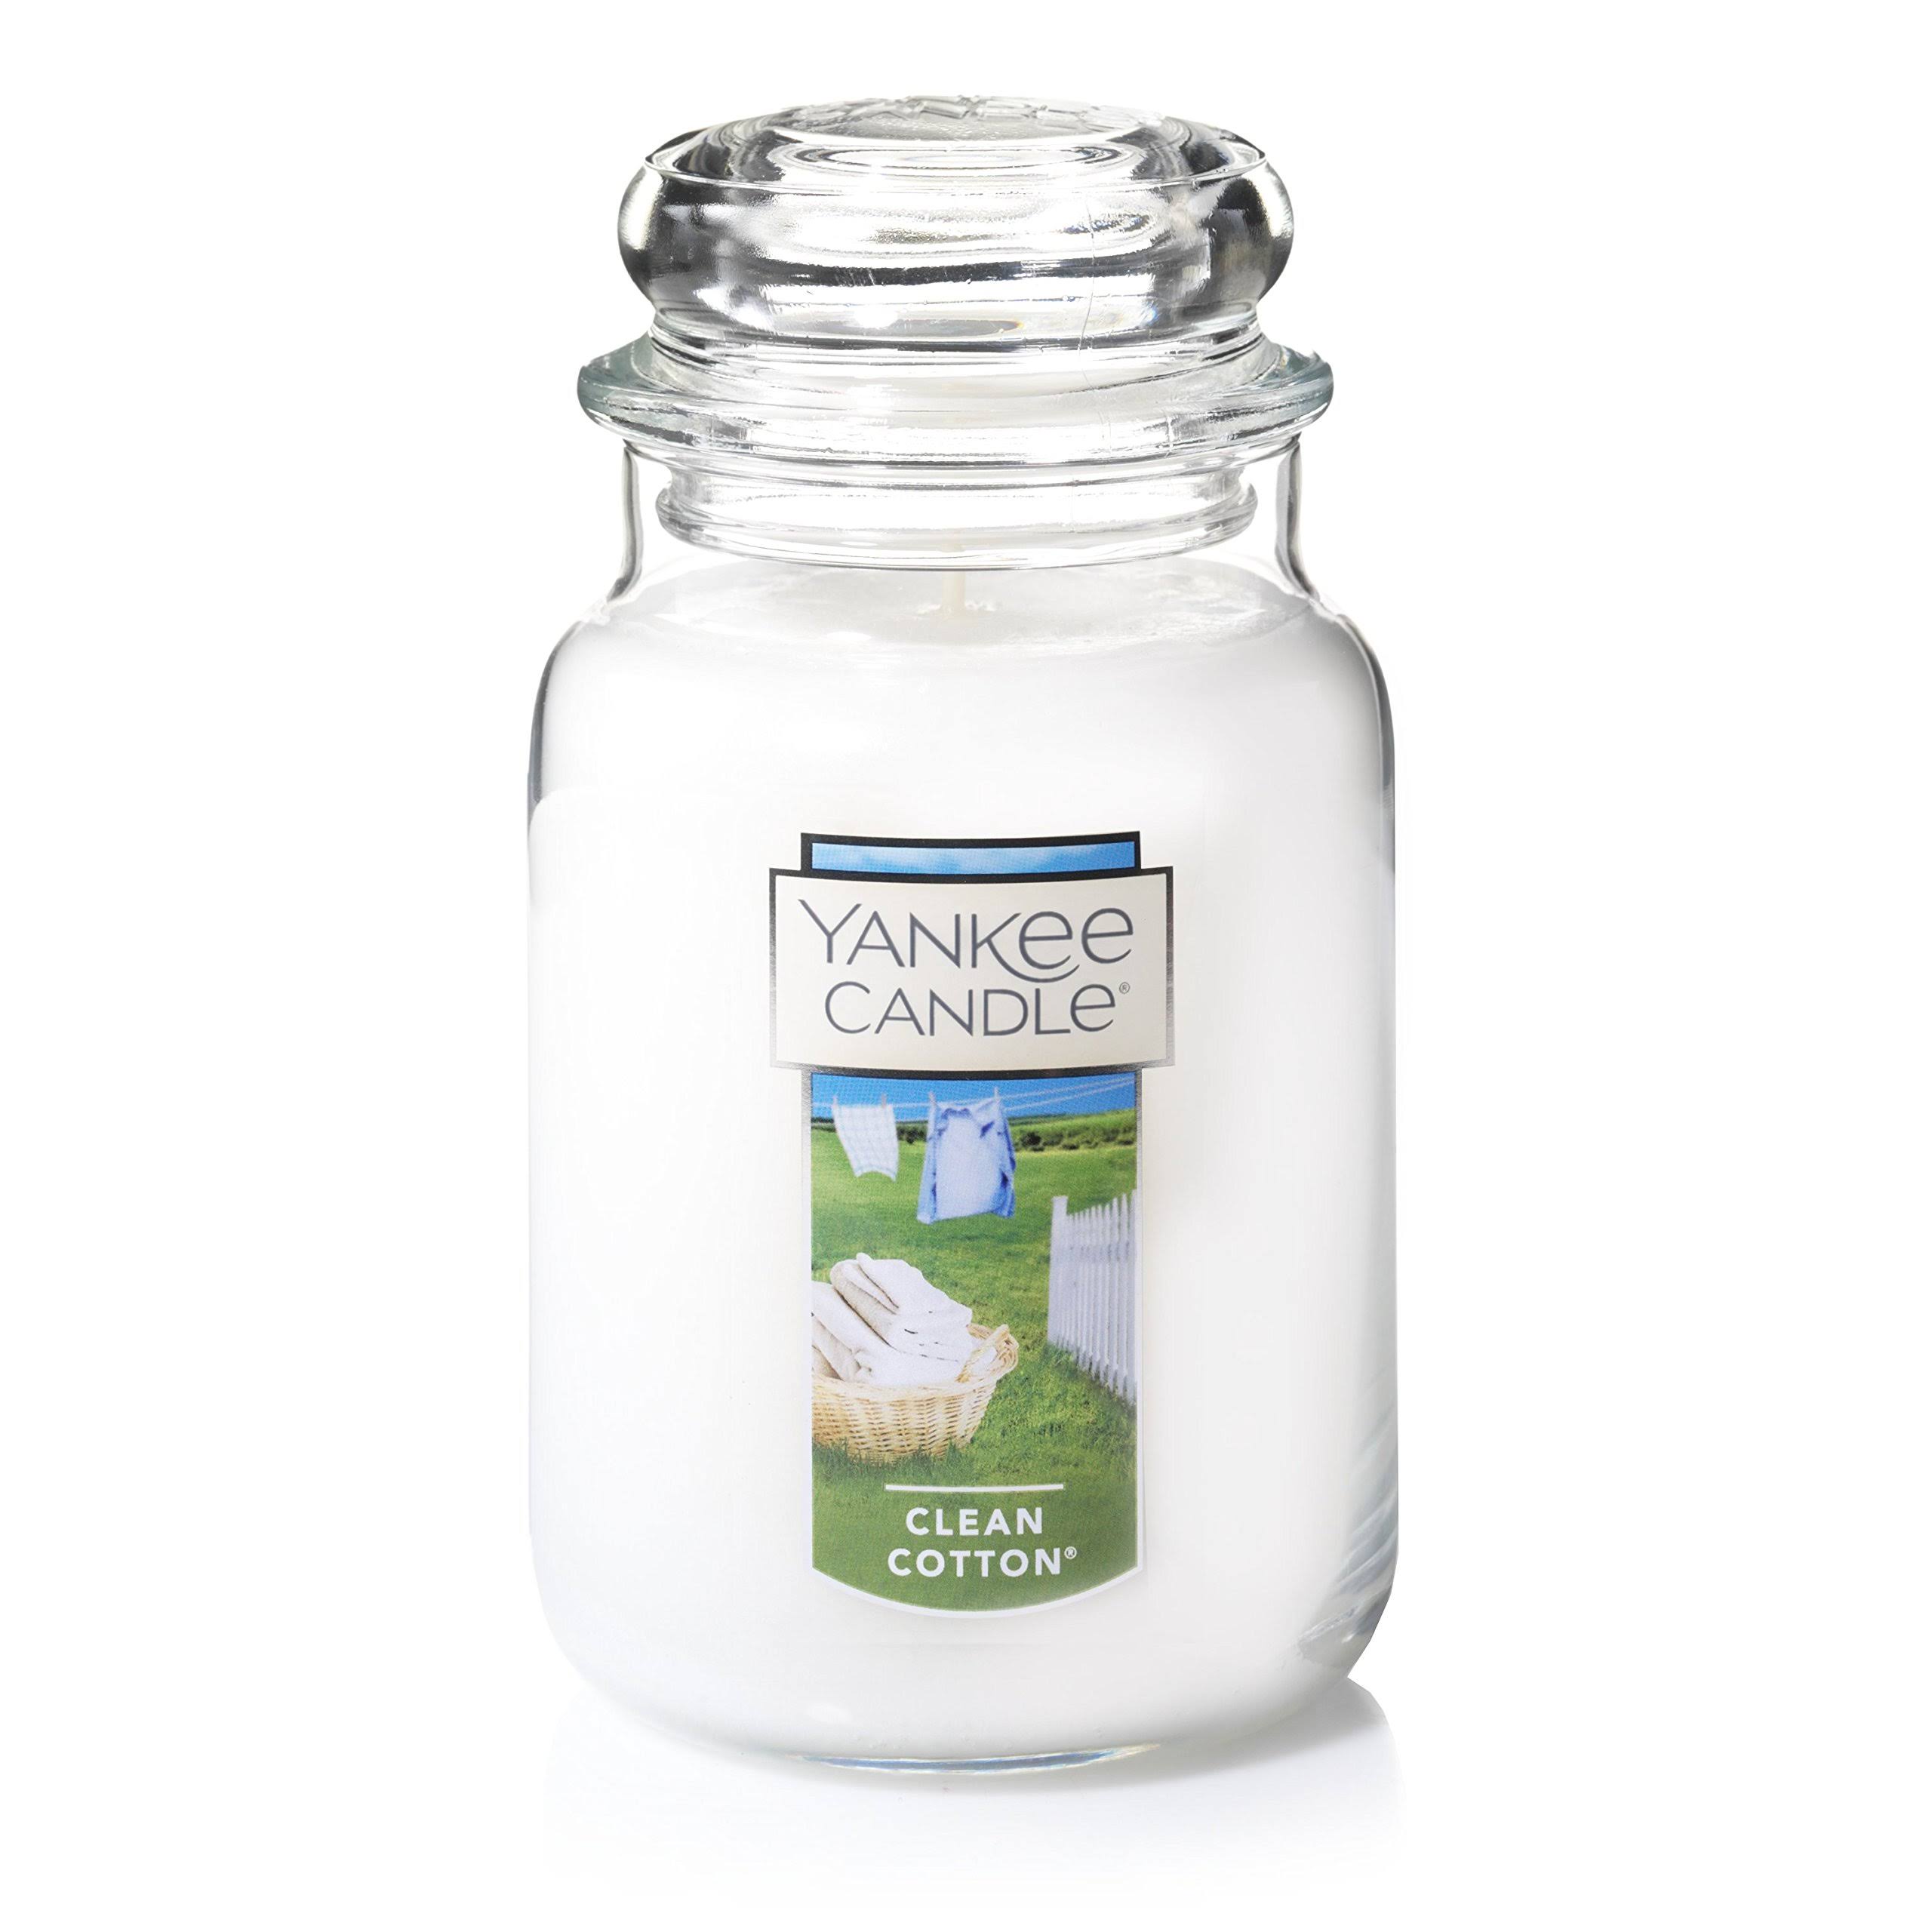 Yankee Candle Jar - Clean Cotton, Large